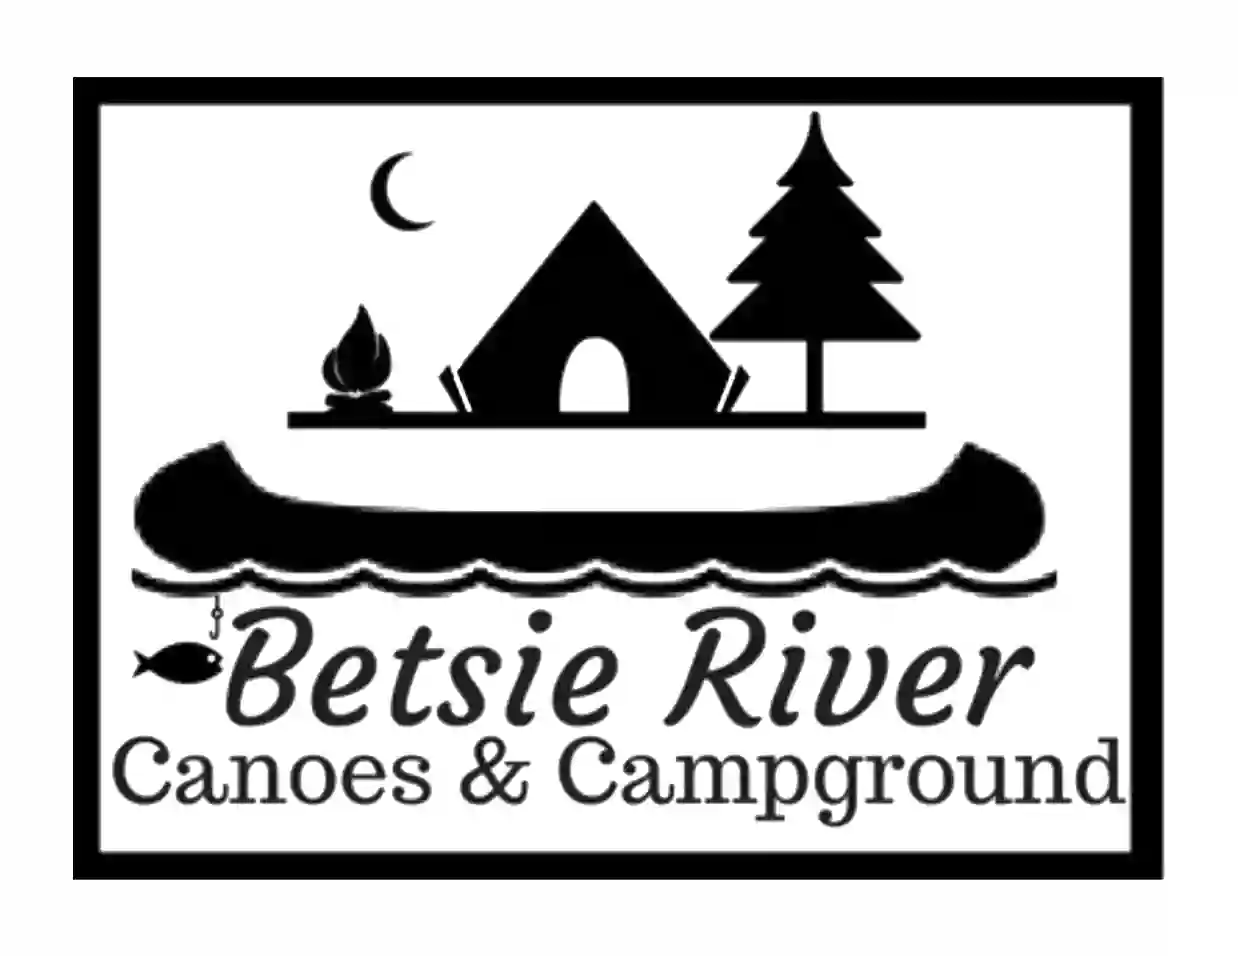 Betsie River Canoes & Campground